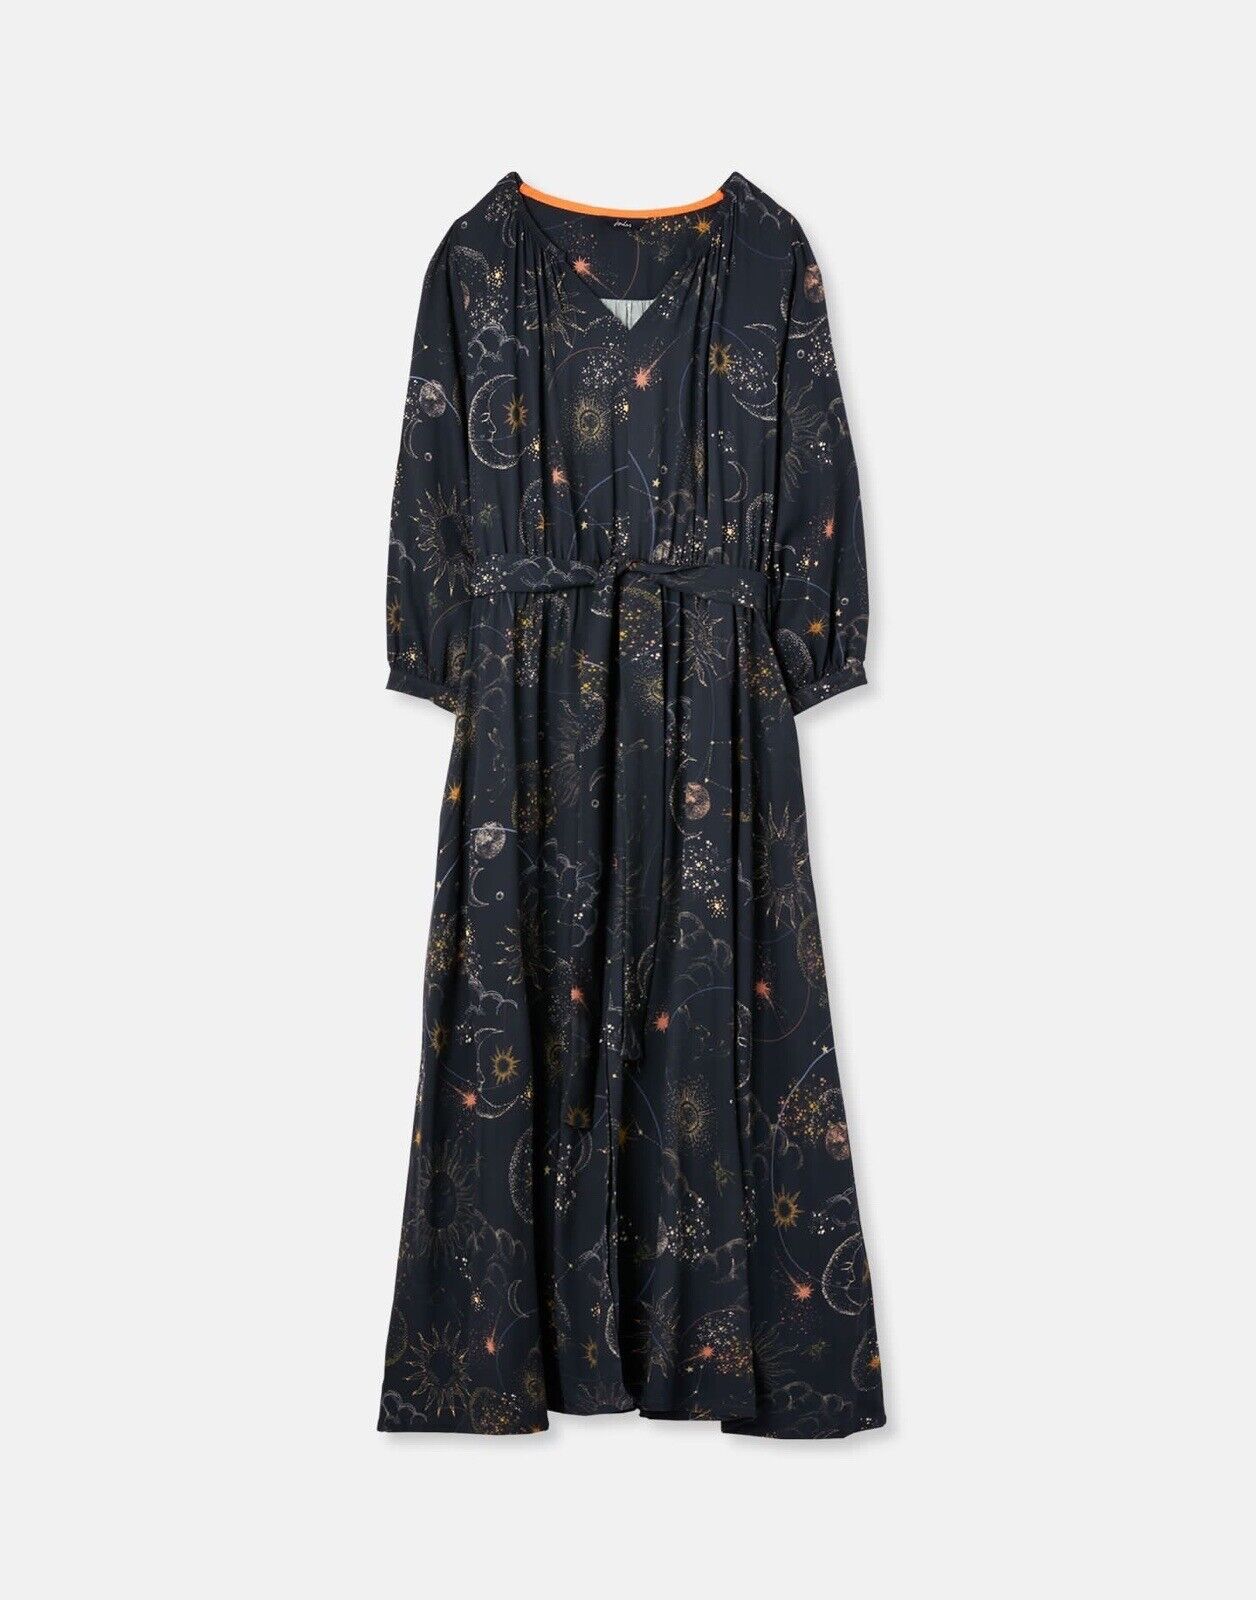 EX Joules Womens Dress Hadley Navy Print Pocket Belted Midaxi 6-24 RRP £89.95